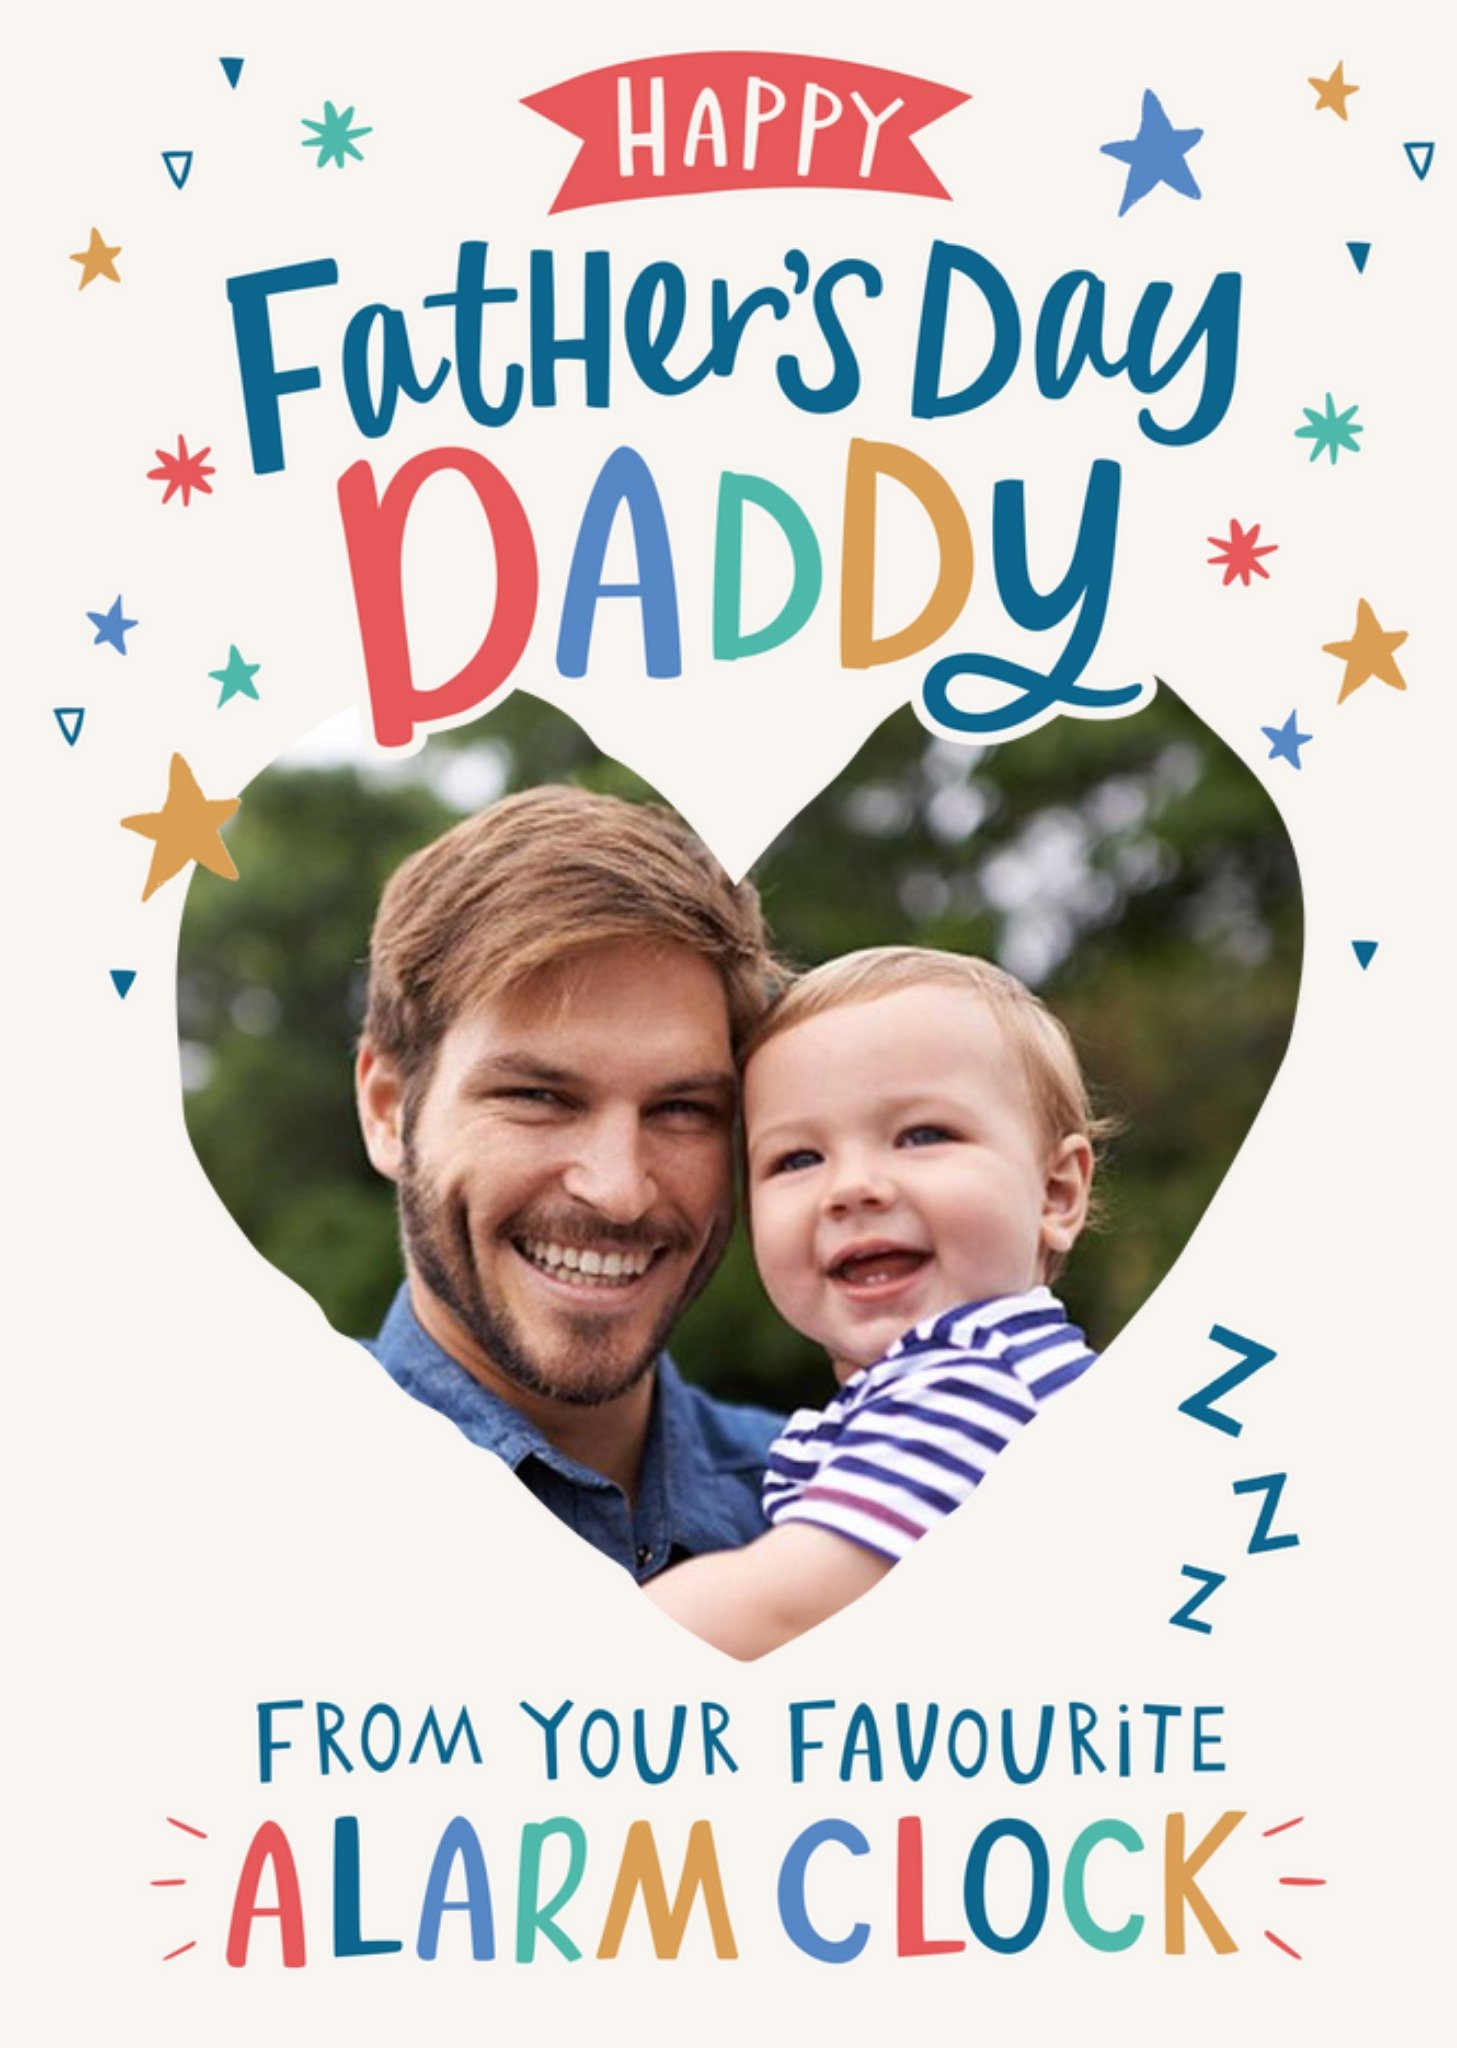 Moonpig Heart Shaped Photo Frame Surrounded By Stars With Colourful Text Father's Day Photo Upload C